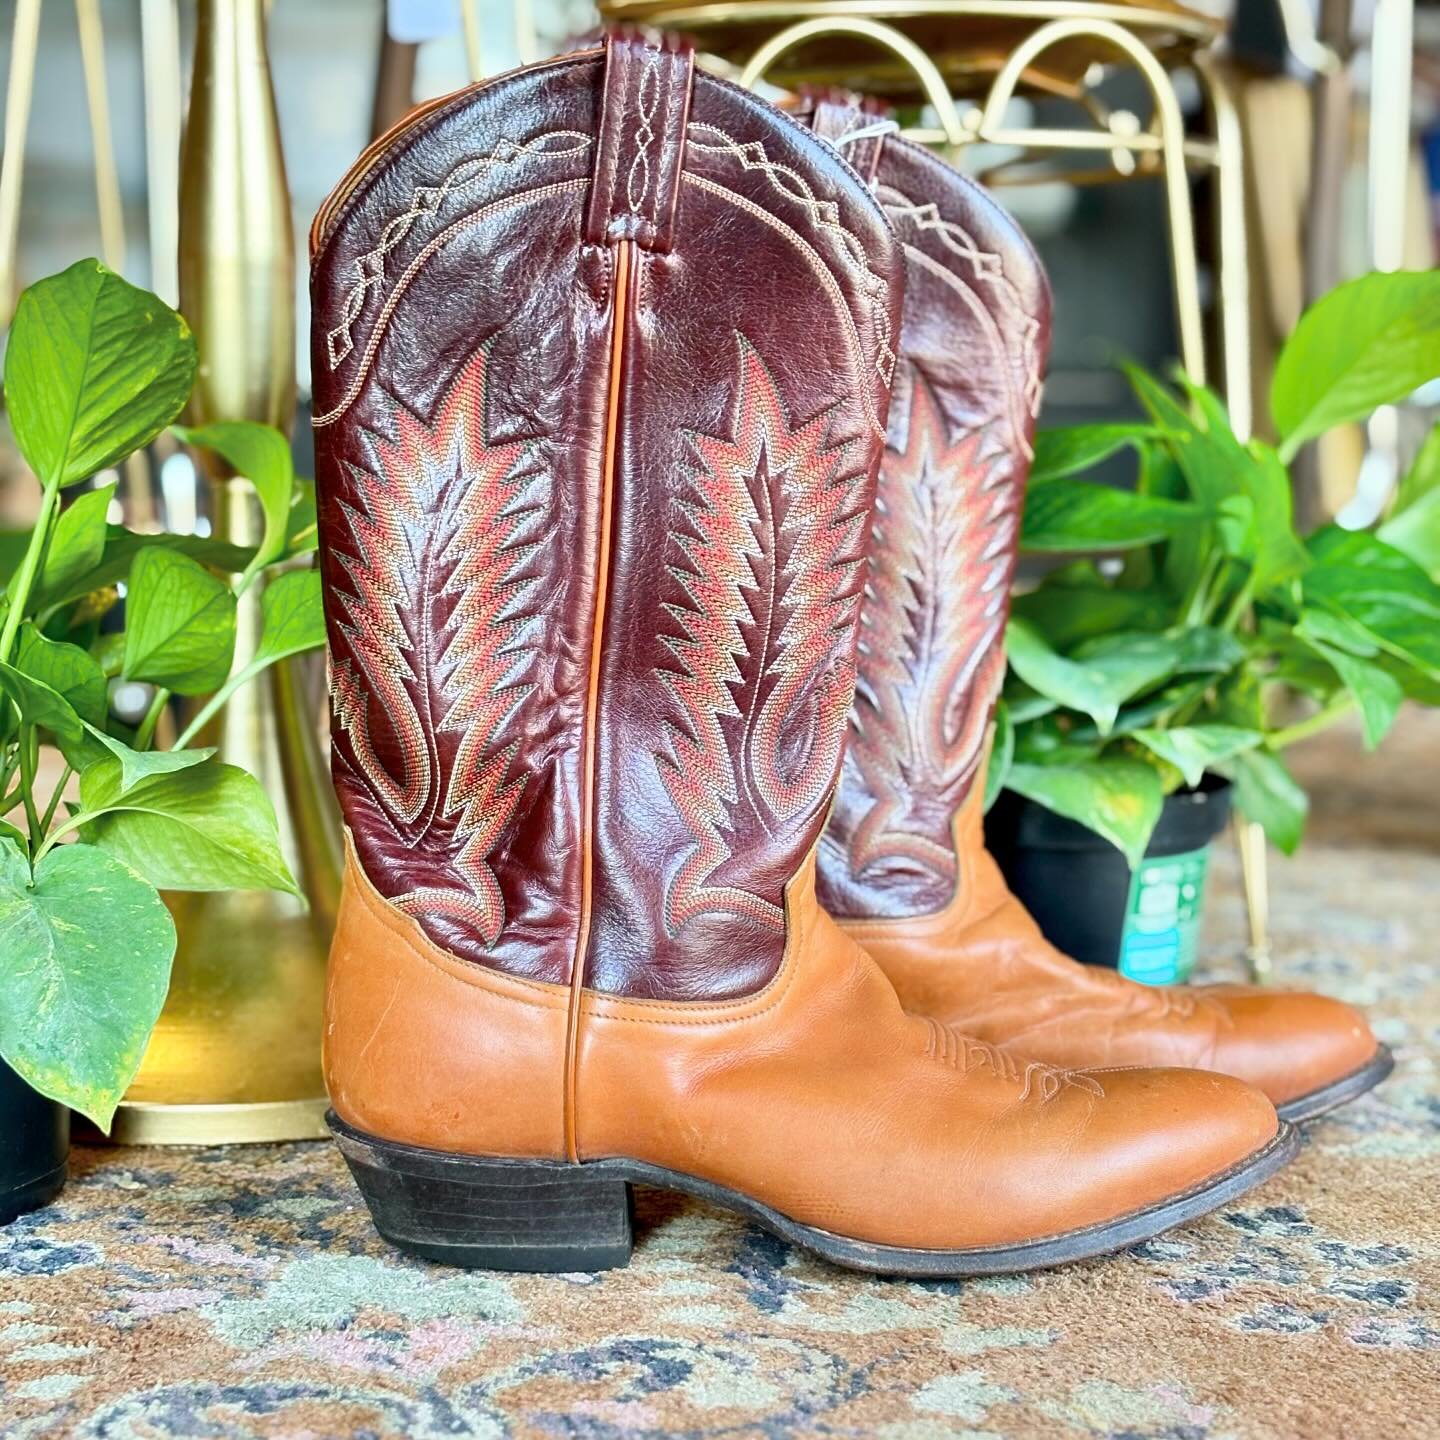 Vintage, made in USA, Tony Lama leather cowboy boots! The design on these are beautiful! Size 10.5
$145